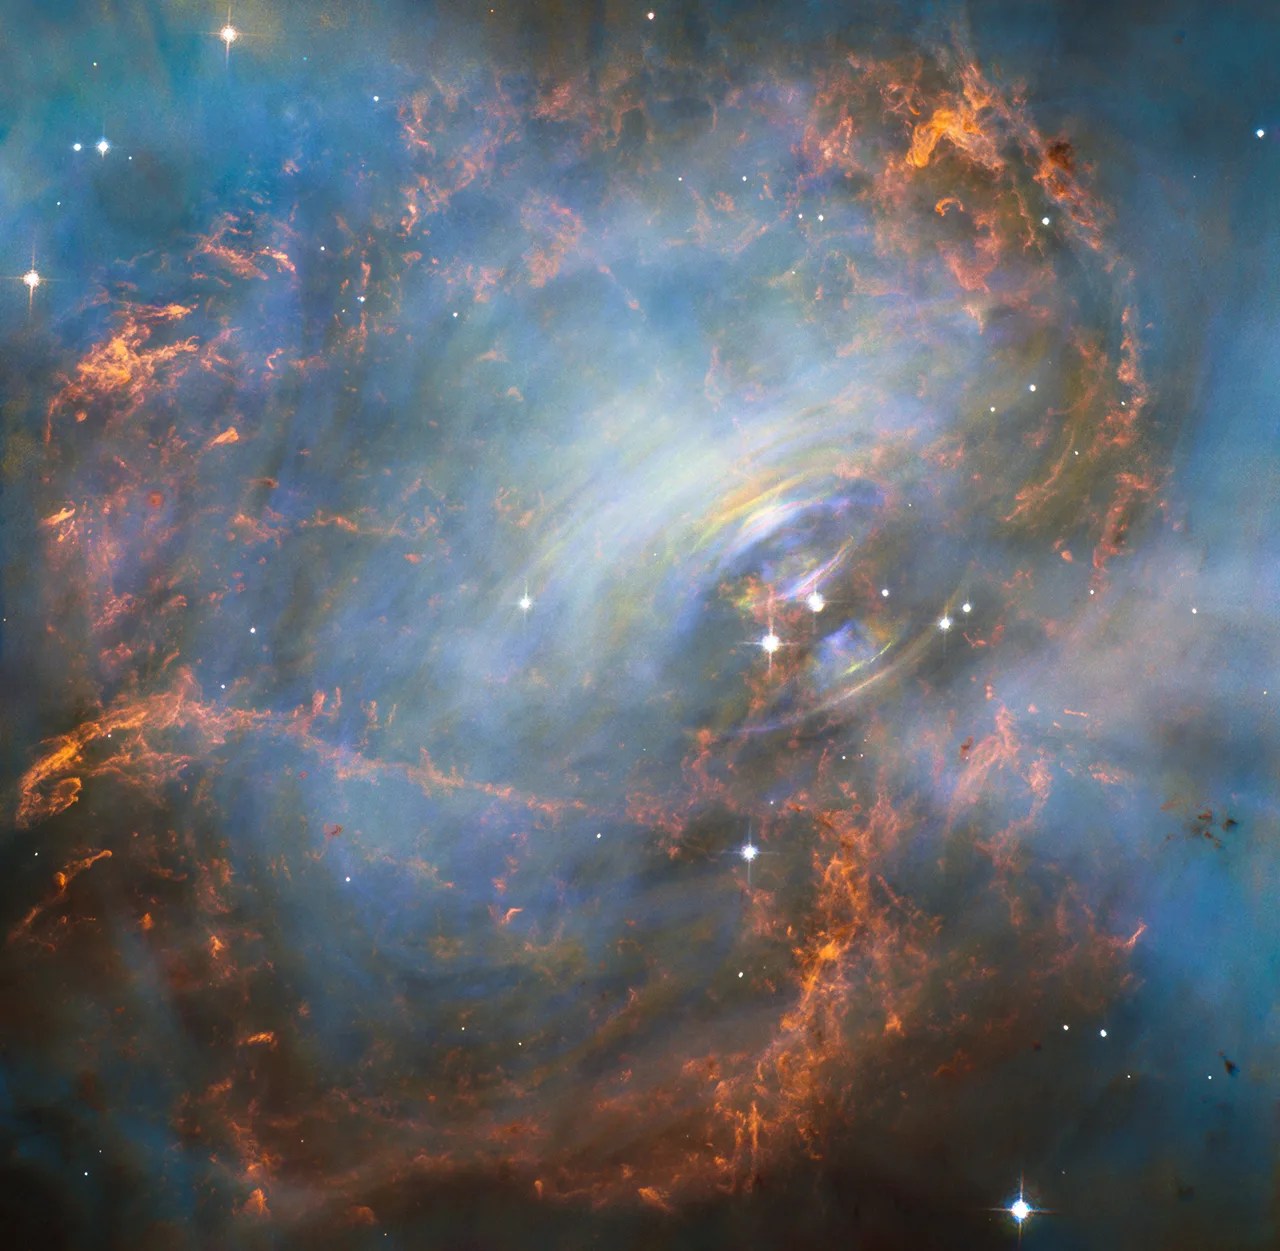 The core of the Crab Nebula - M1 showing ripples in the gas and dust.